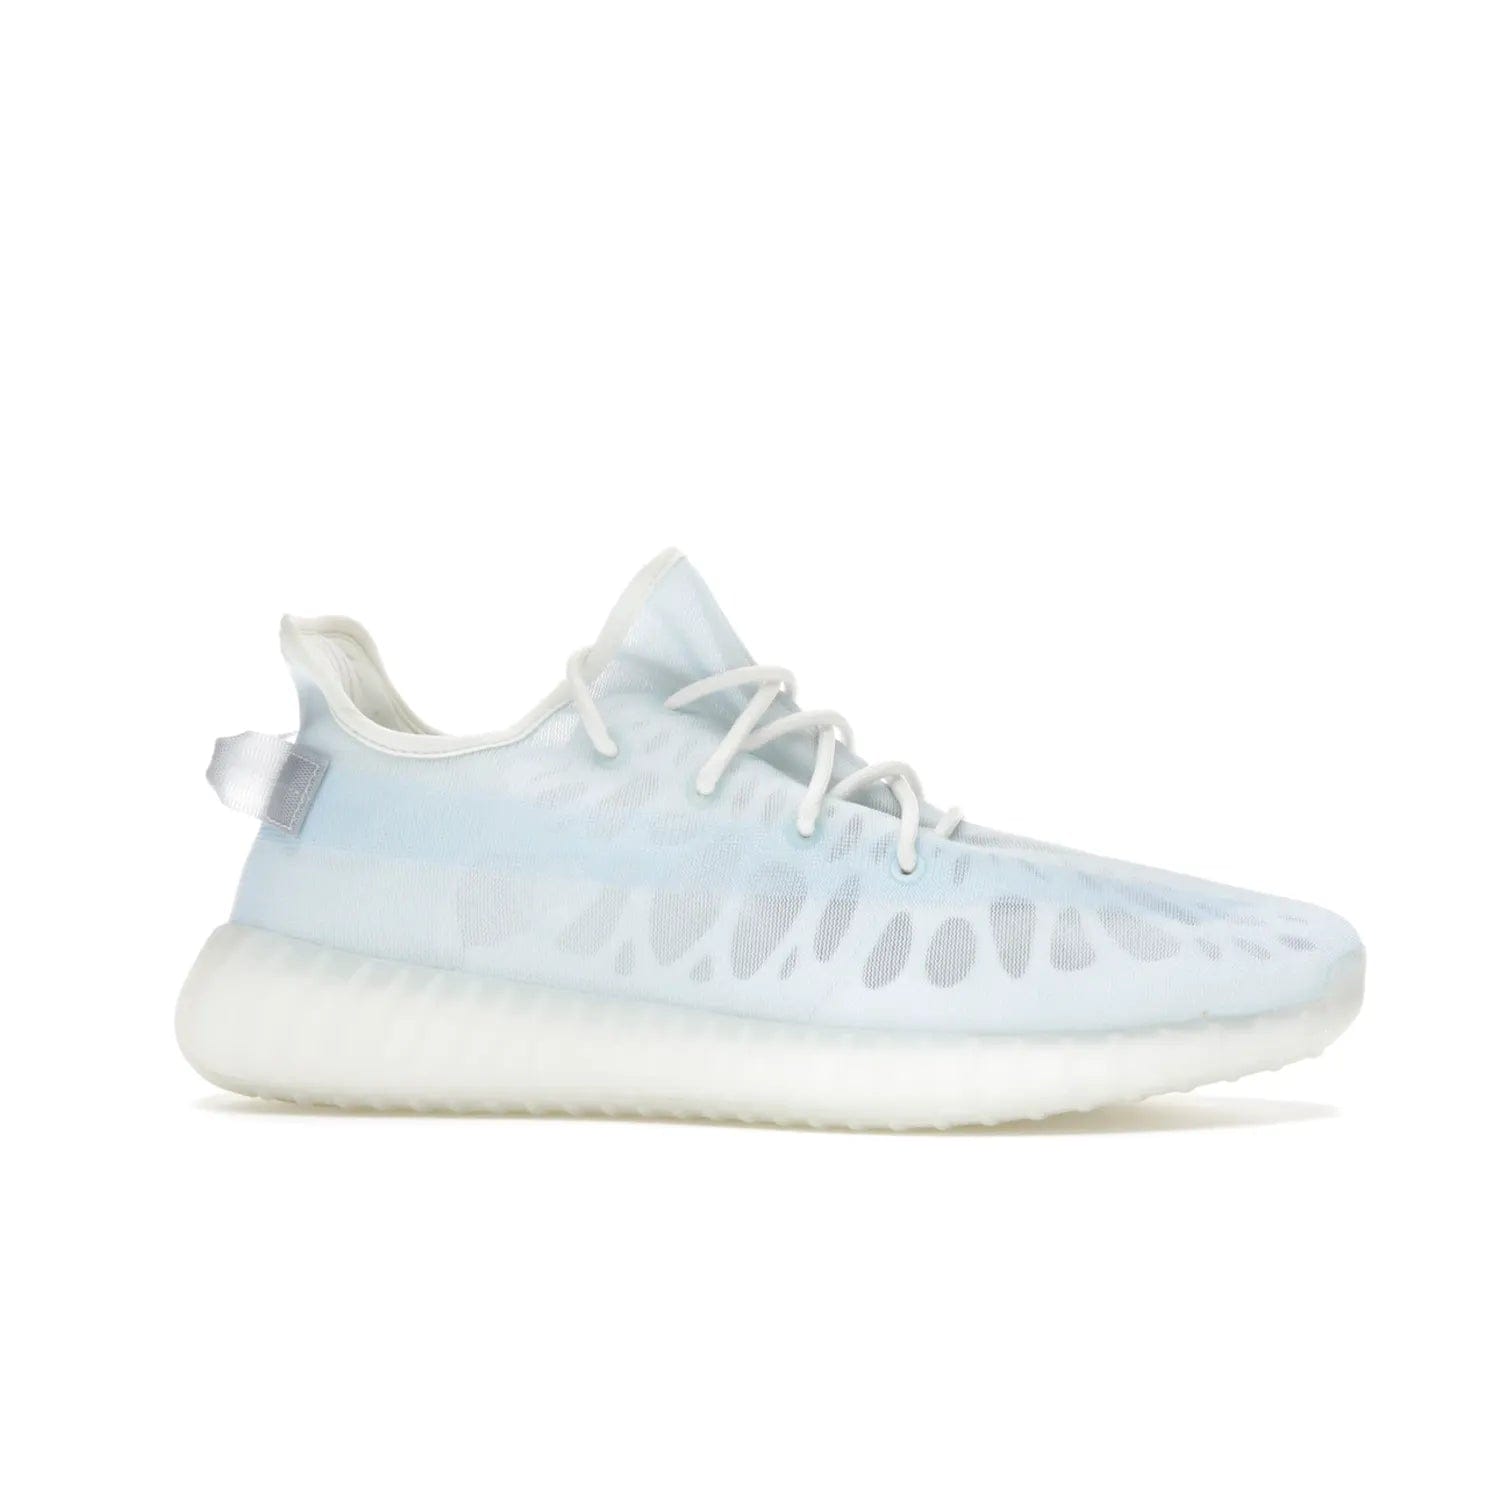 adidas Yeezy Boost 350 V2 Mono Ice - Image 2 - Only at www.BallersClubKickz.com - Introducing the adidas Yeezy 350 V2 Mono Ice - a sleek monofilament mesh design in Ice blue with Boost sole and heel pull tab. Released exclusively in the US for $220.